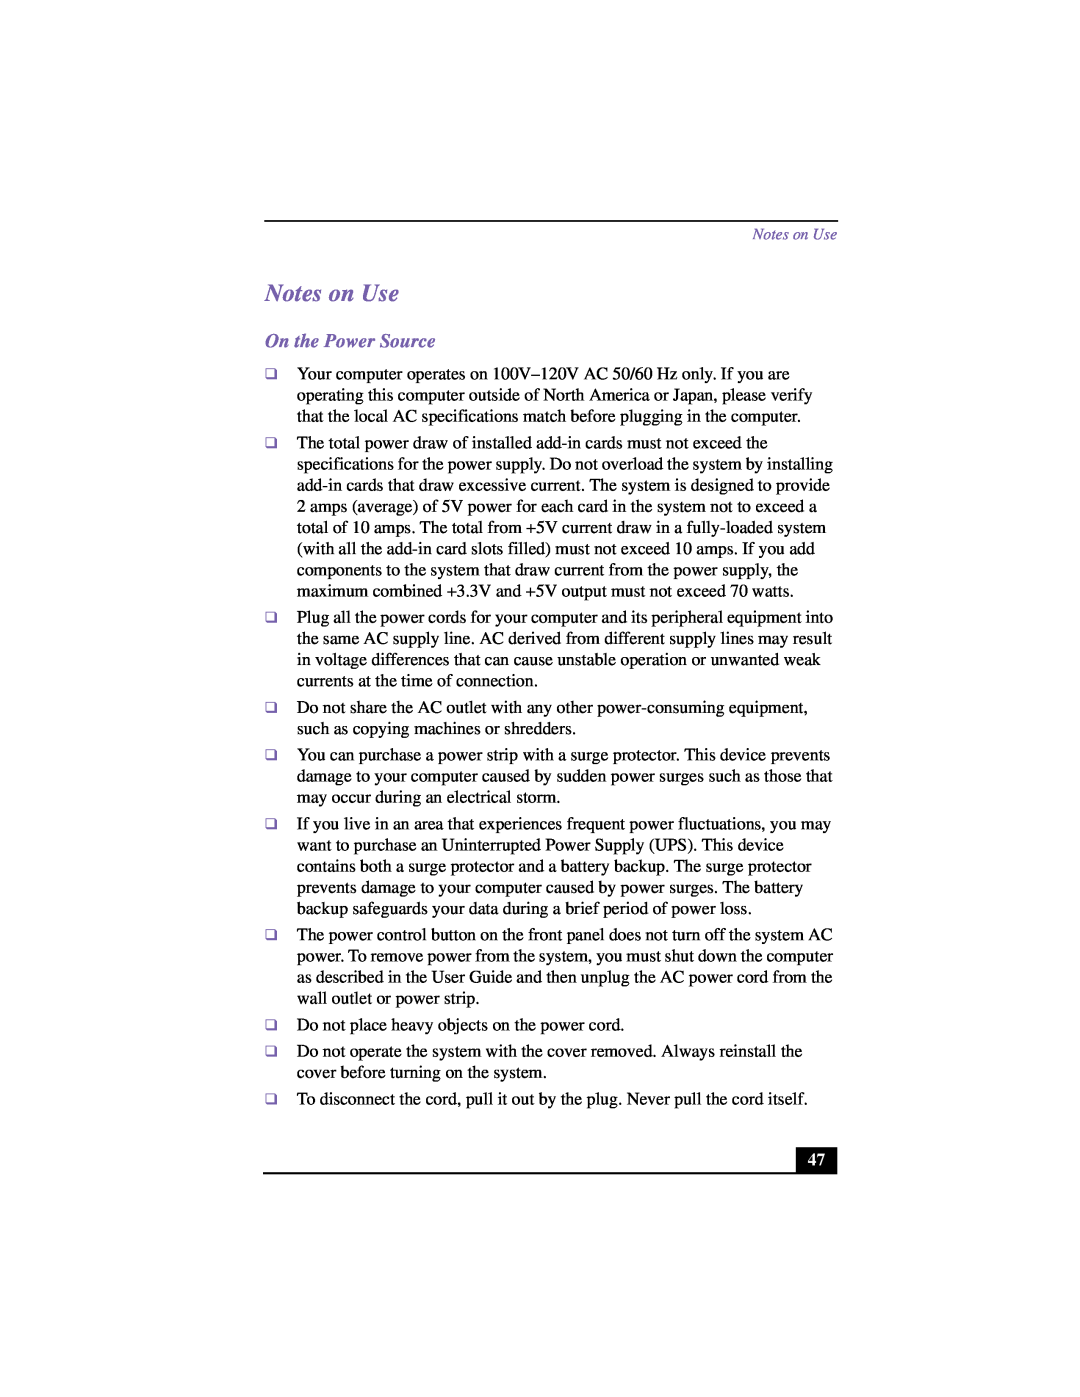 Sony VAIO manual Notes on Use, On the Power Source 